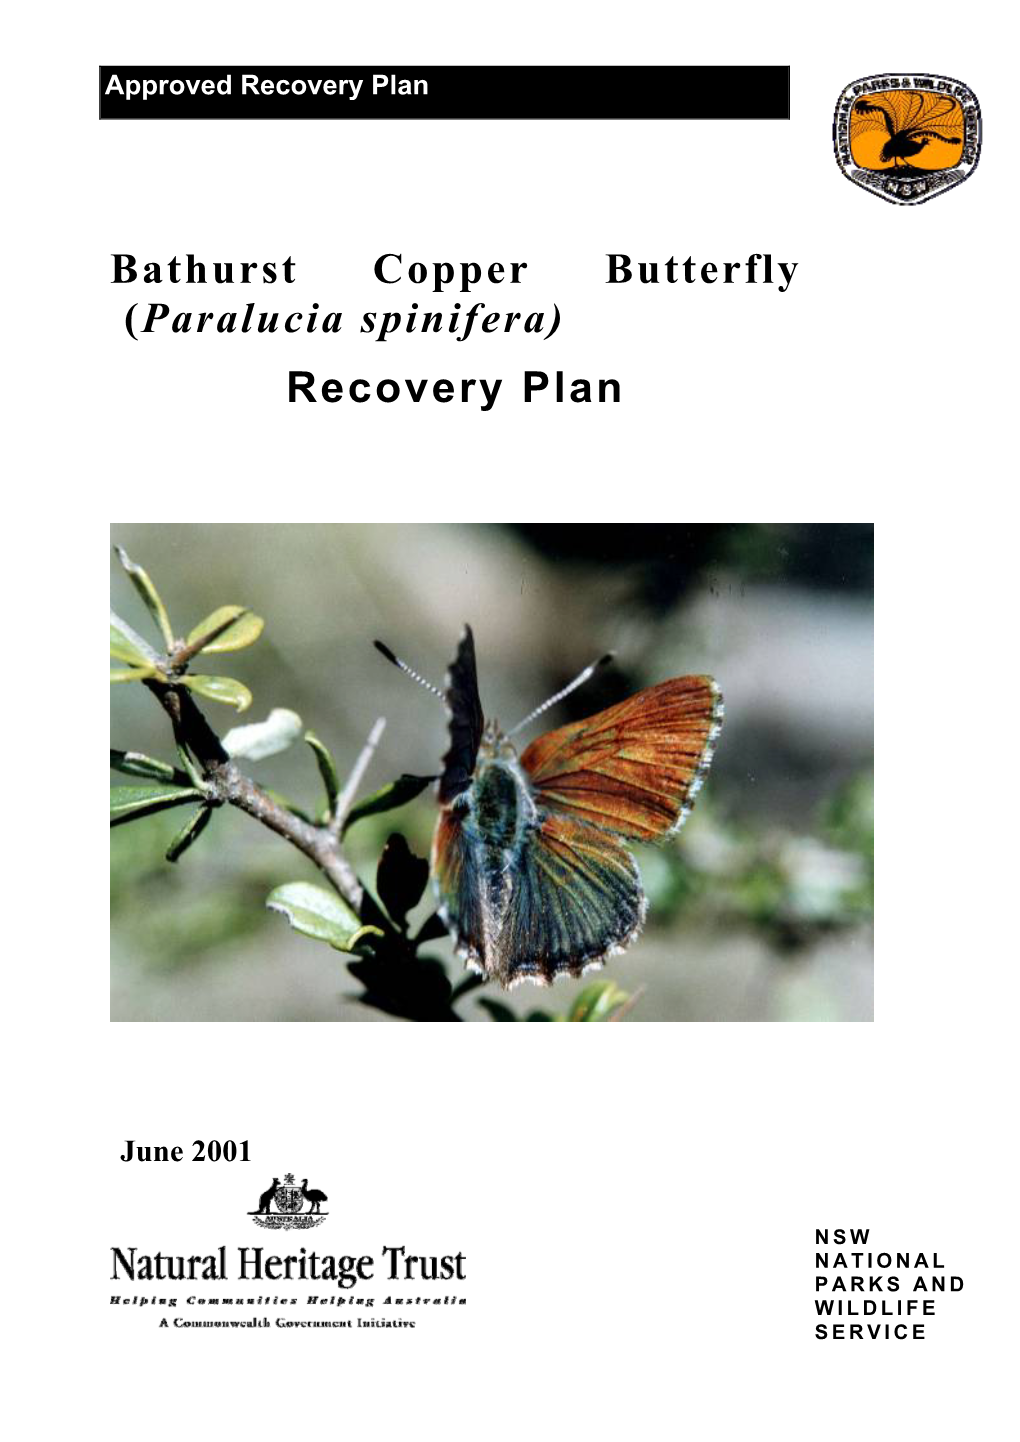 Recovery Plan for the Bathurst Copper Butterfly (Paralucia Spinifera)